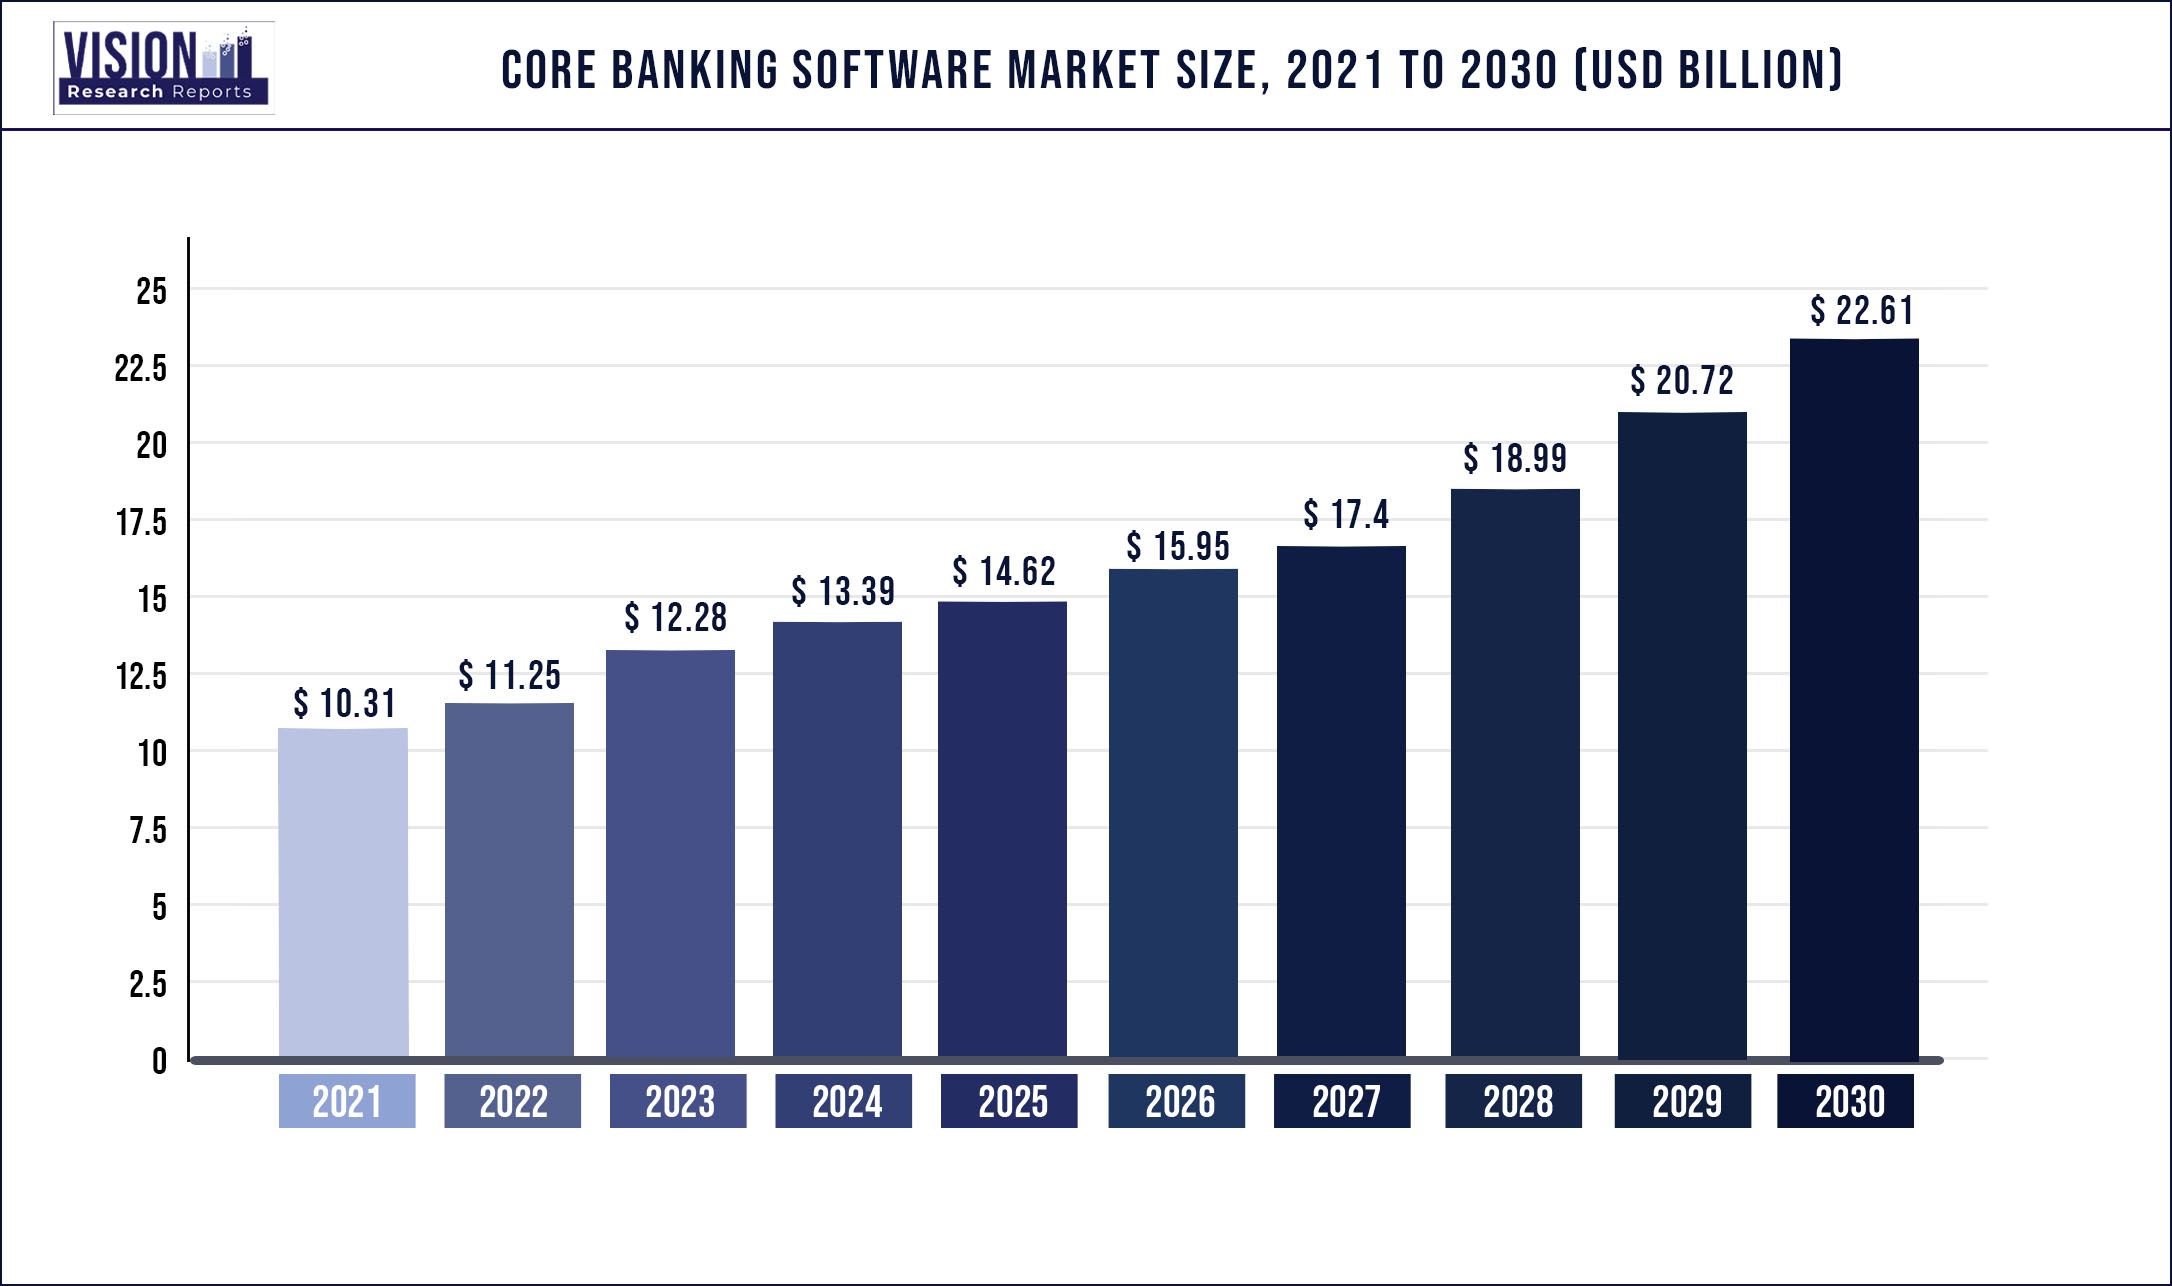 Core Banking Software Market Size 2021 to 2030